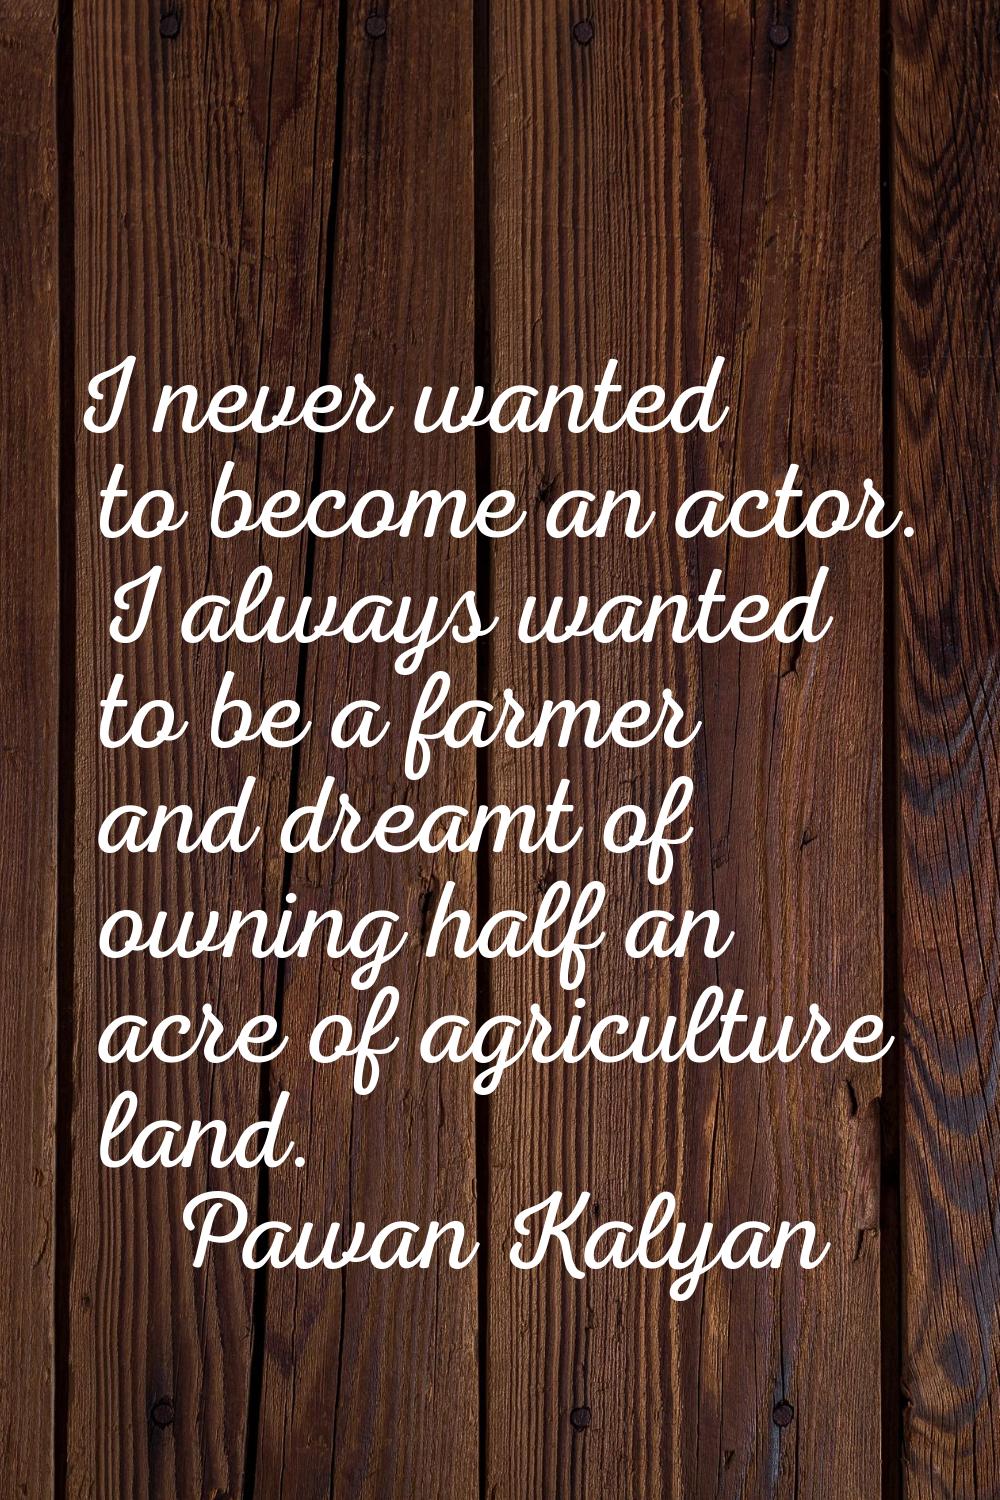 I never wanted to become an actor. I always wanted to be a farmer and dreamt of owning half an acre